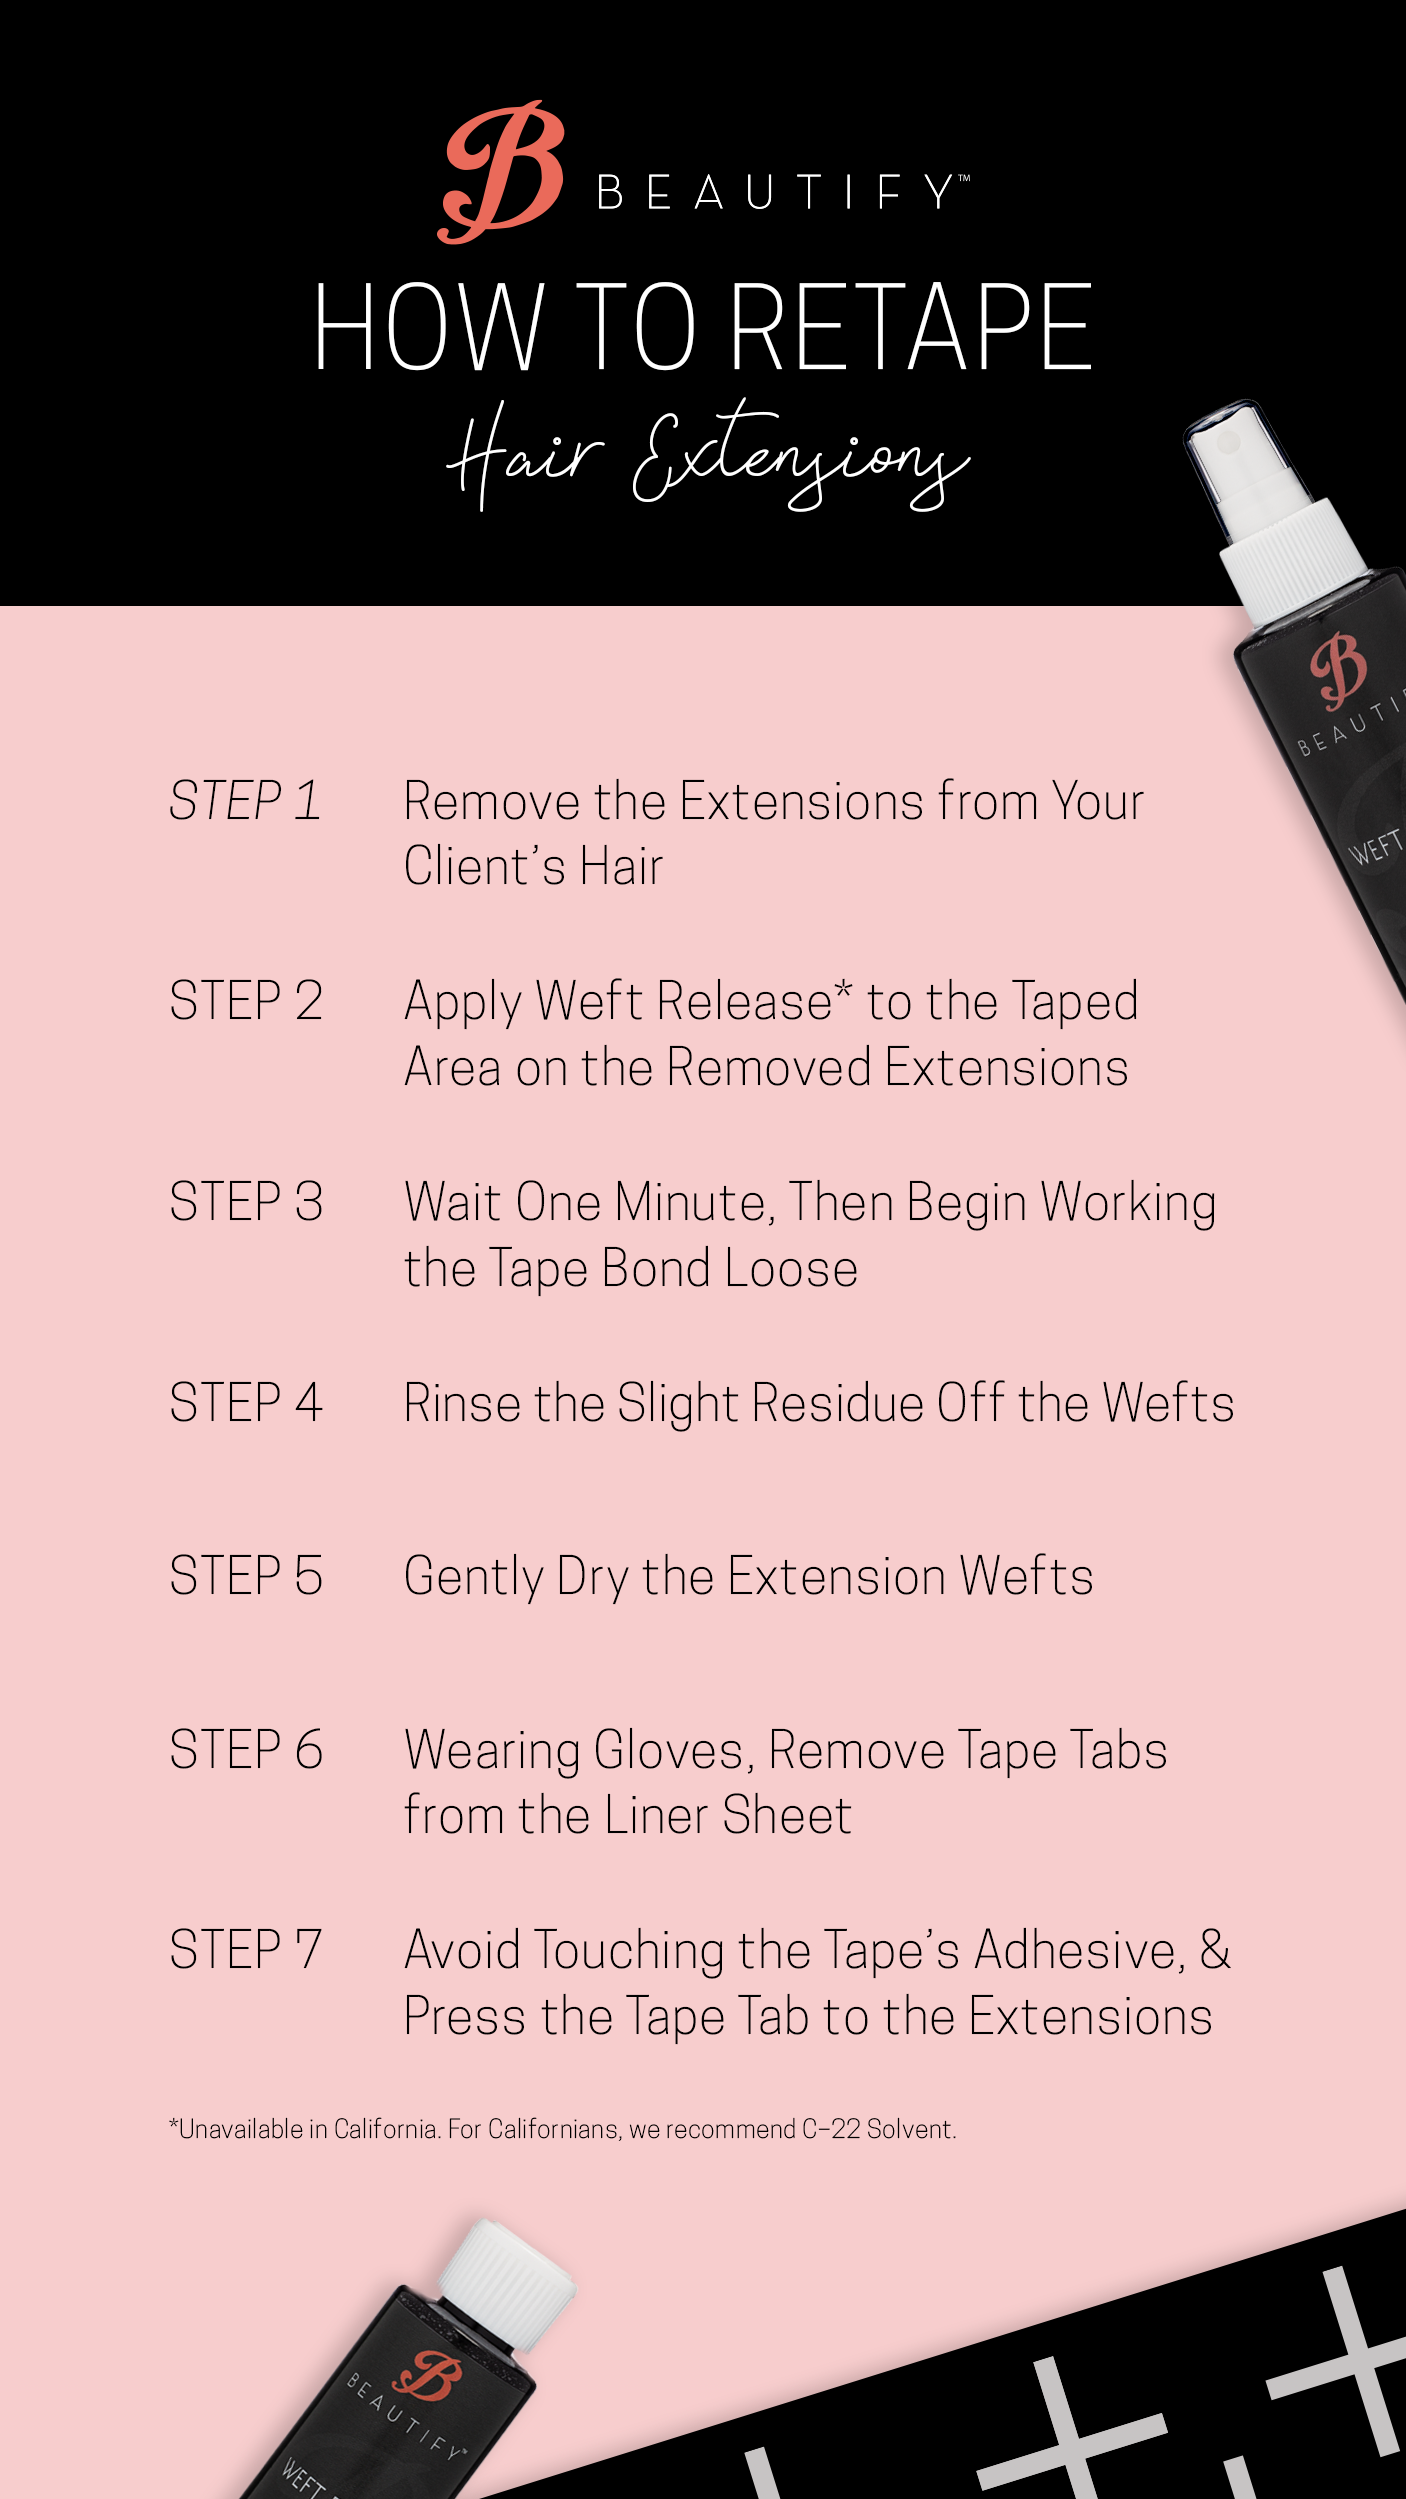 How to Retape Hair Extensions